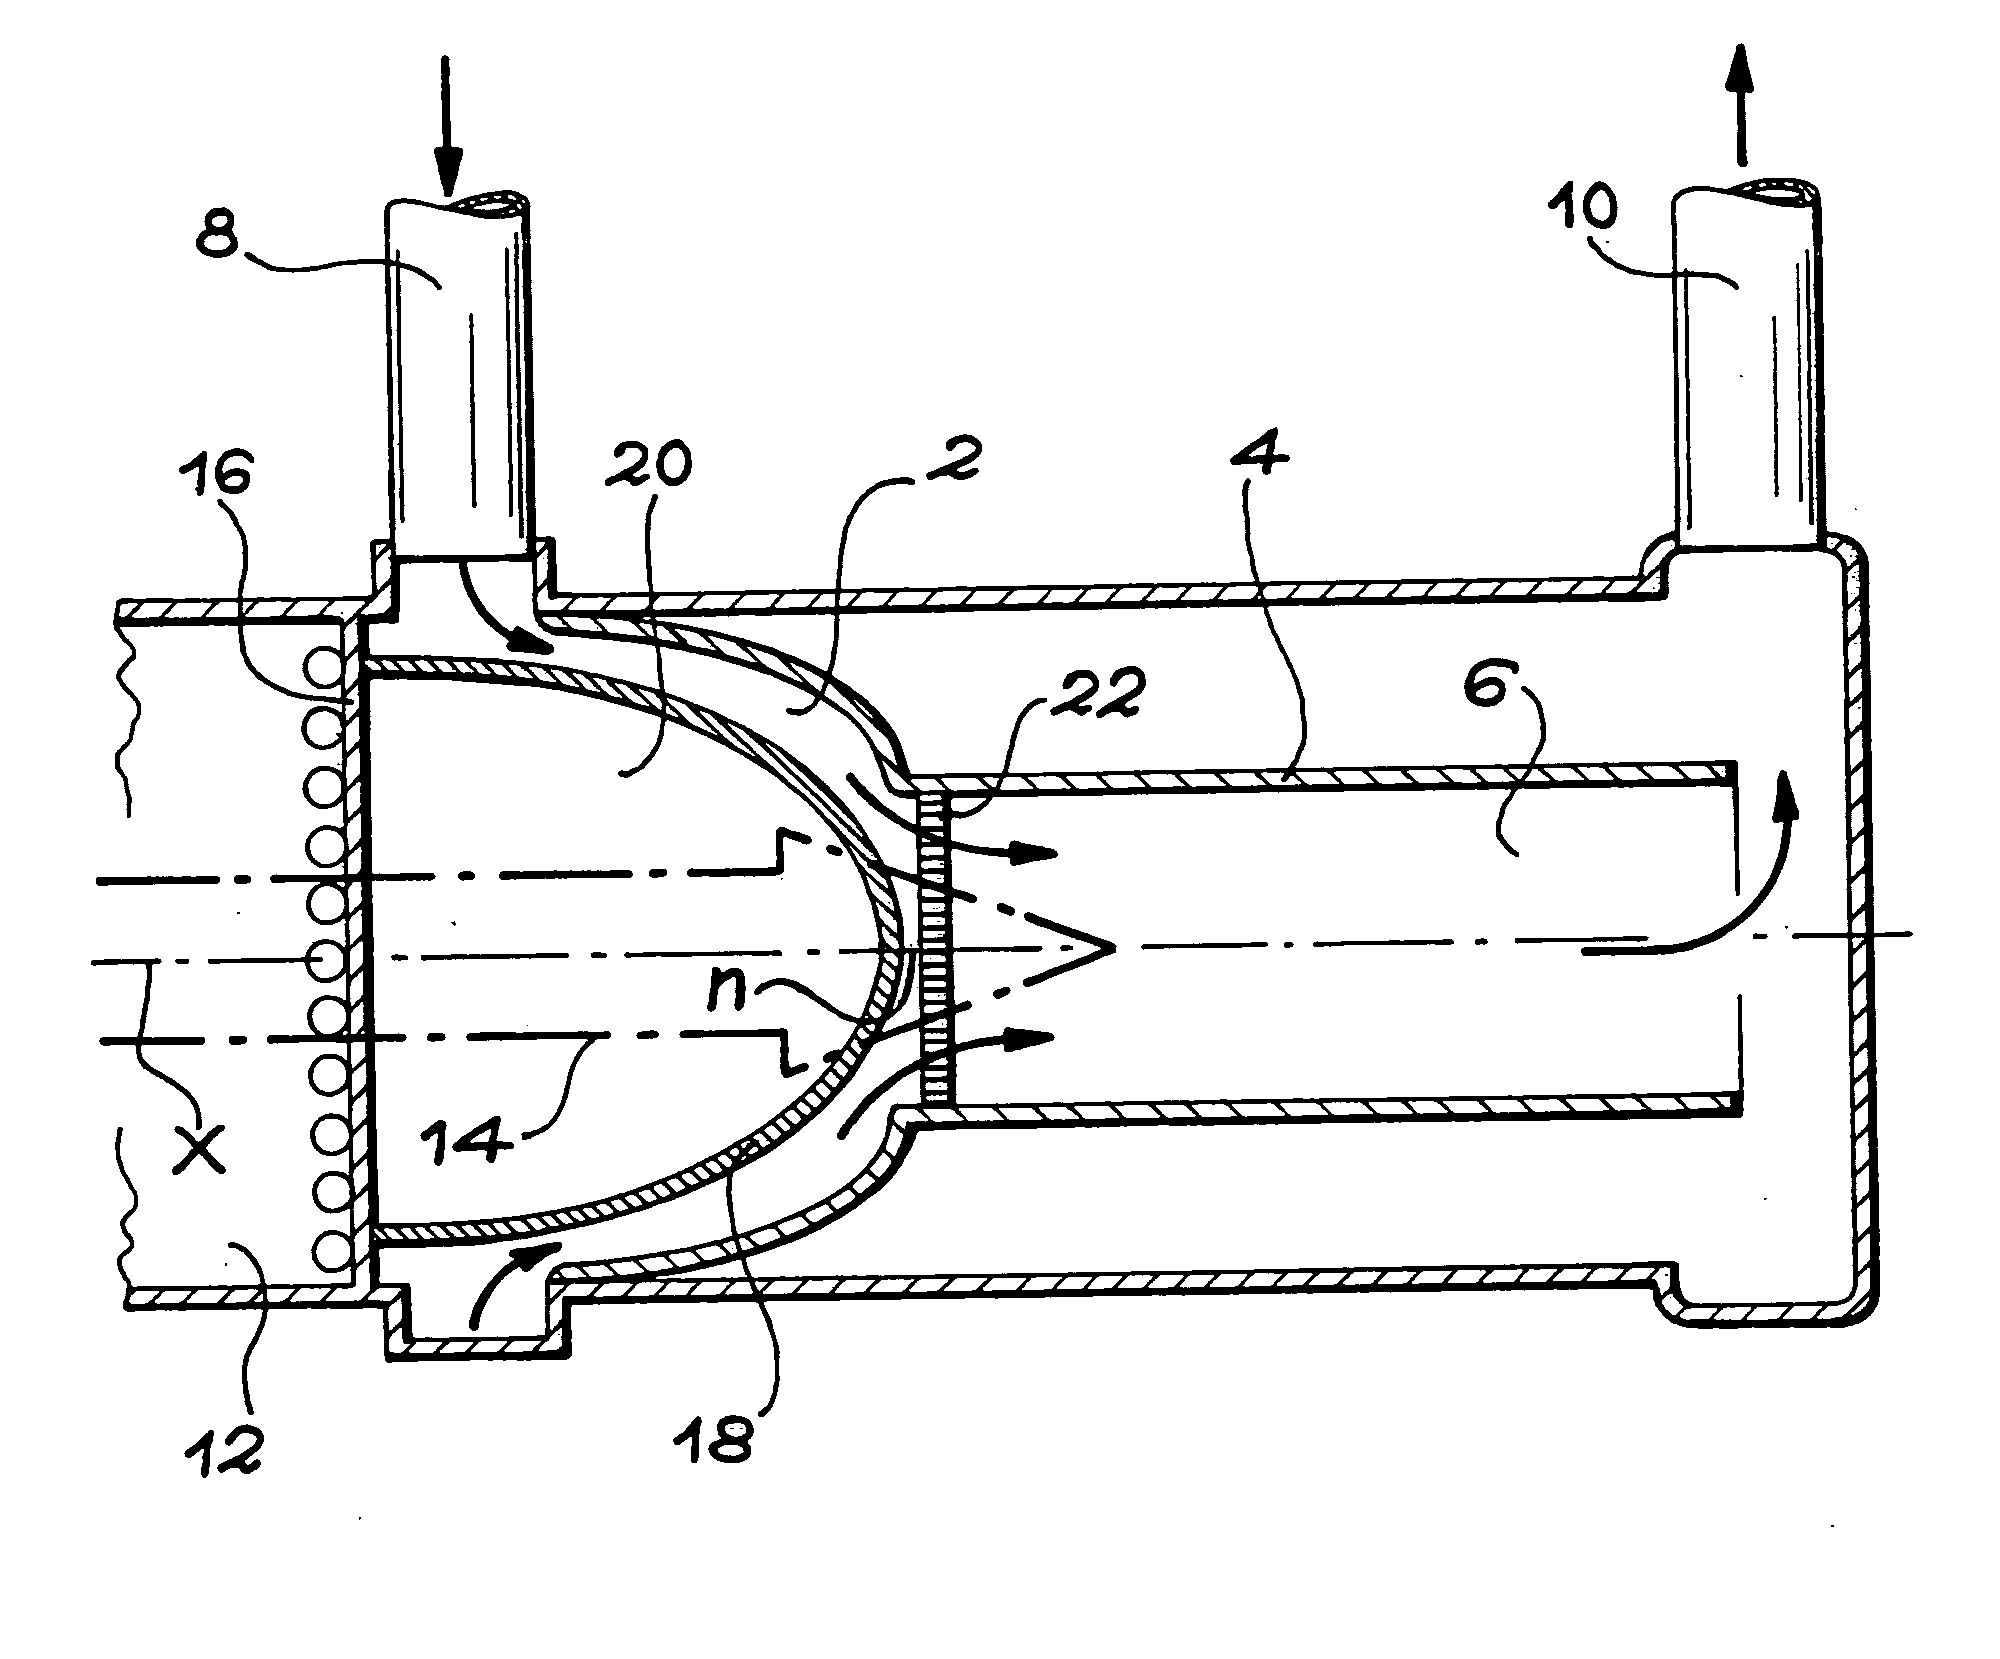 Spallation device for producing neutrons